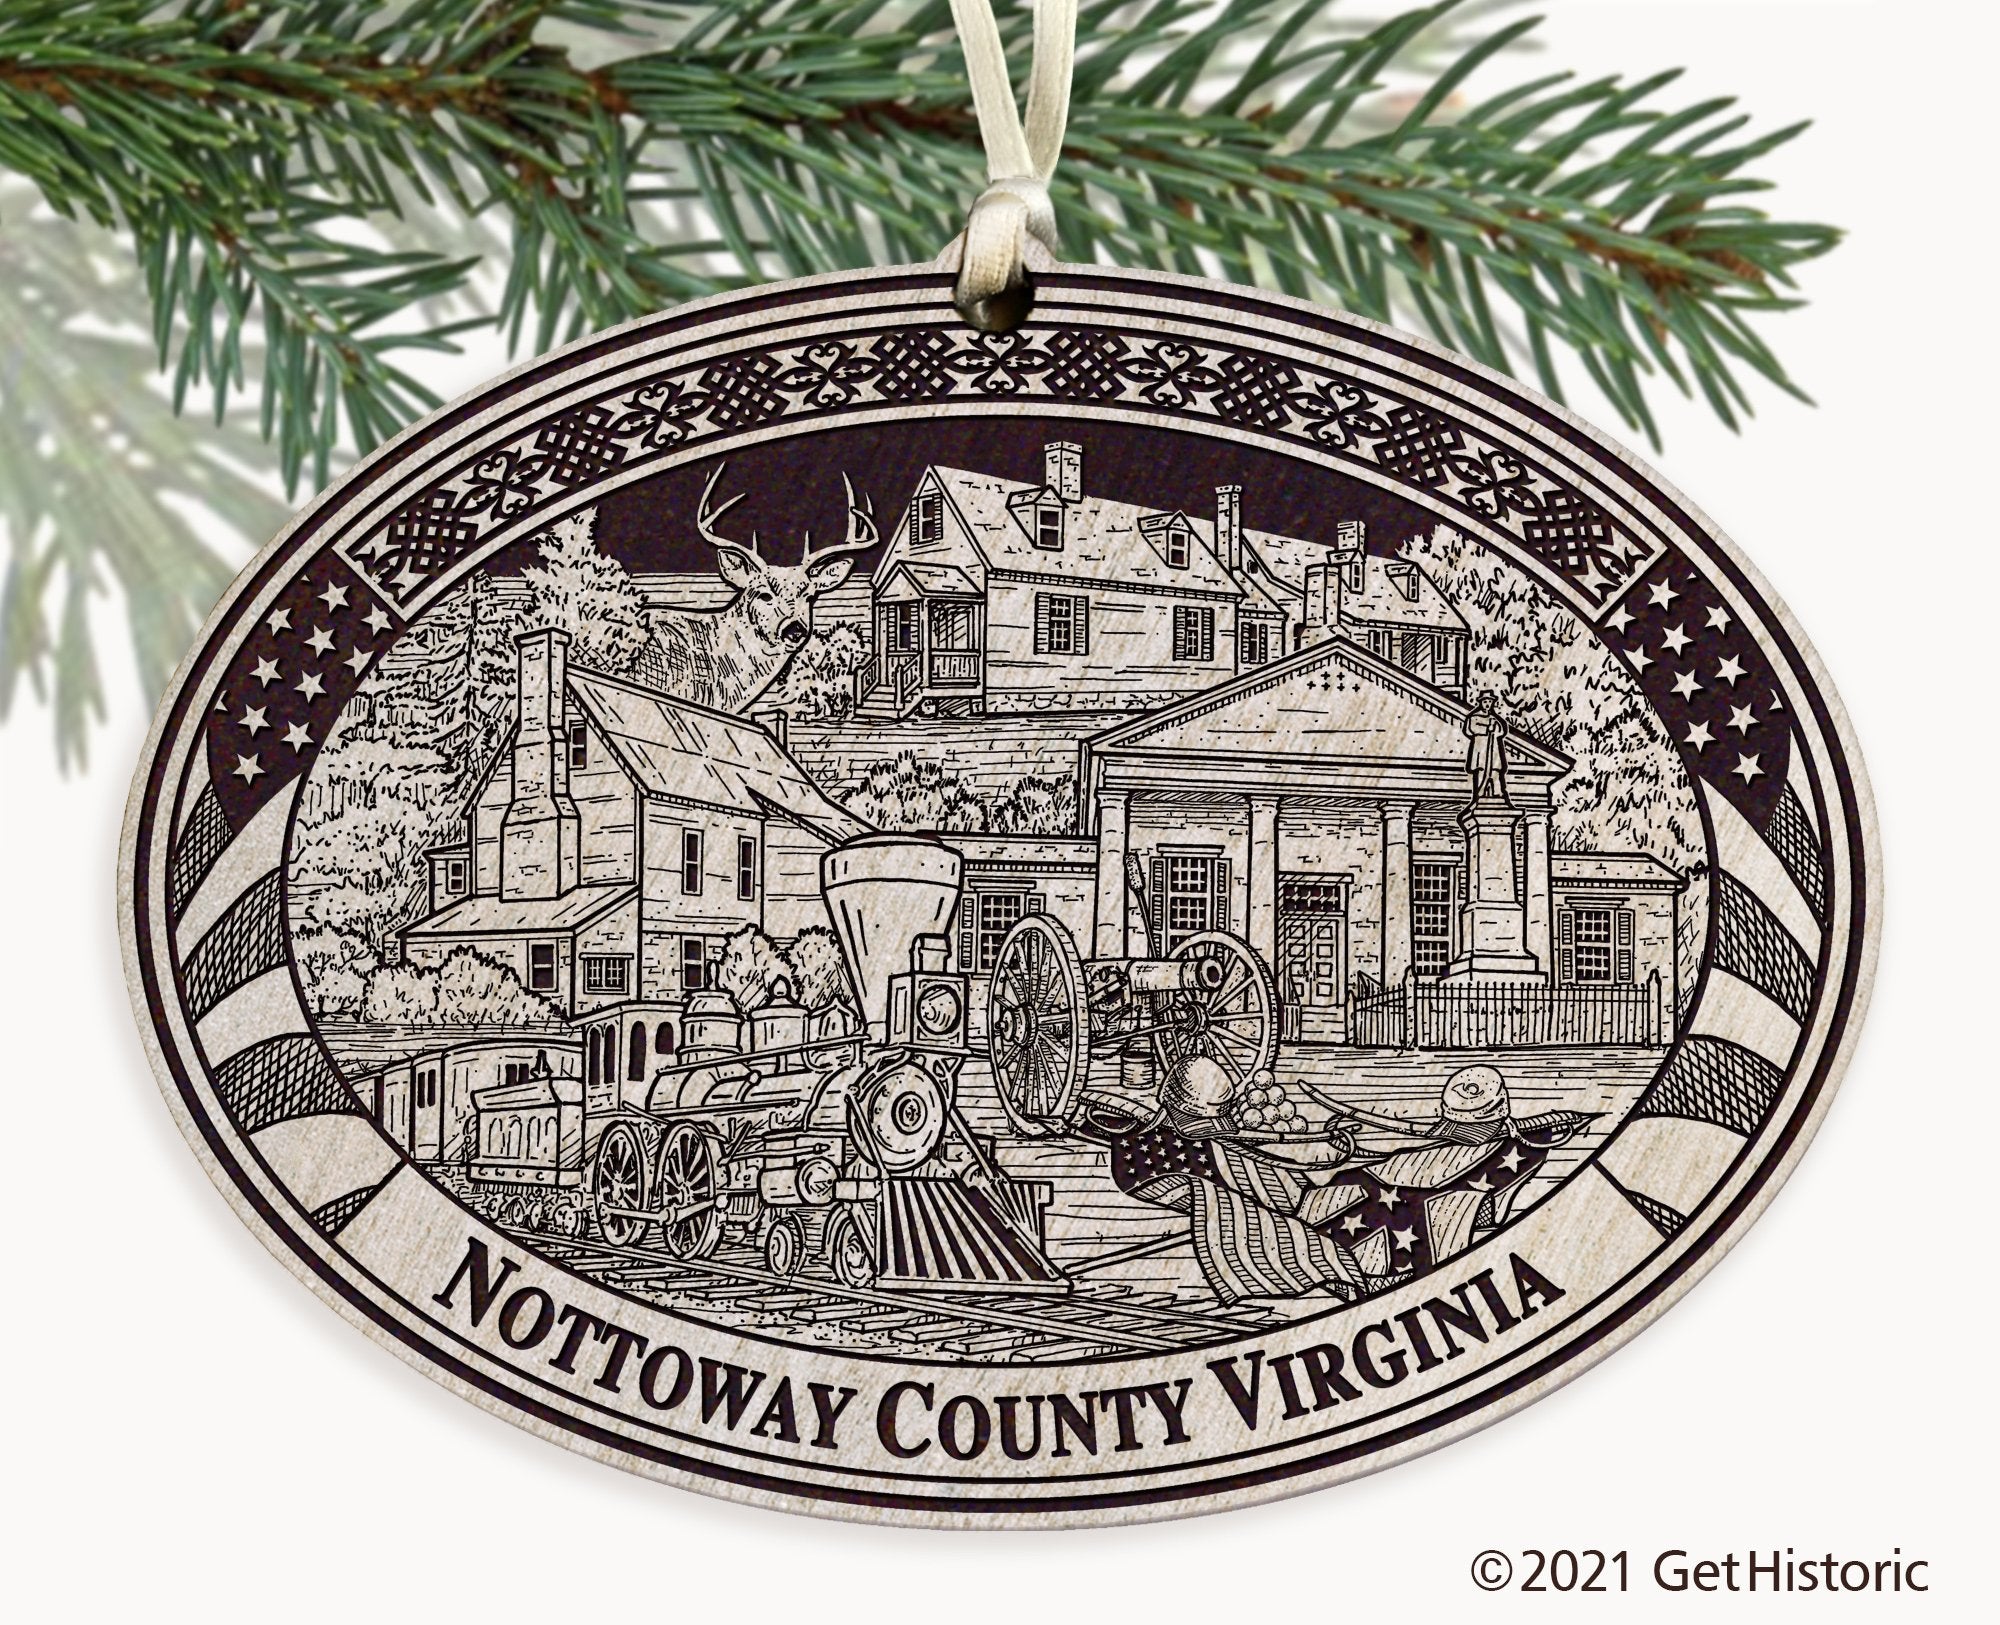 Nottoway County Virginia Engraved Ornament